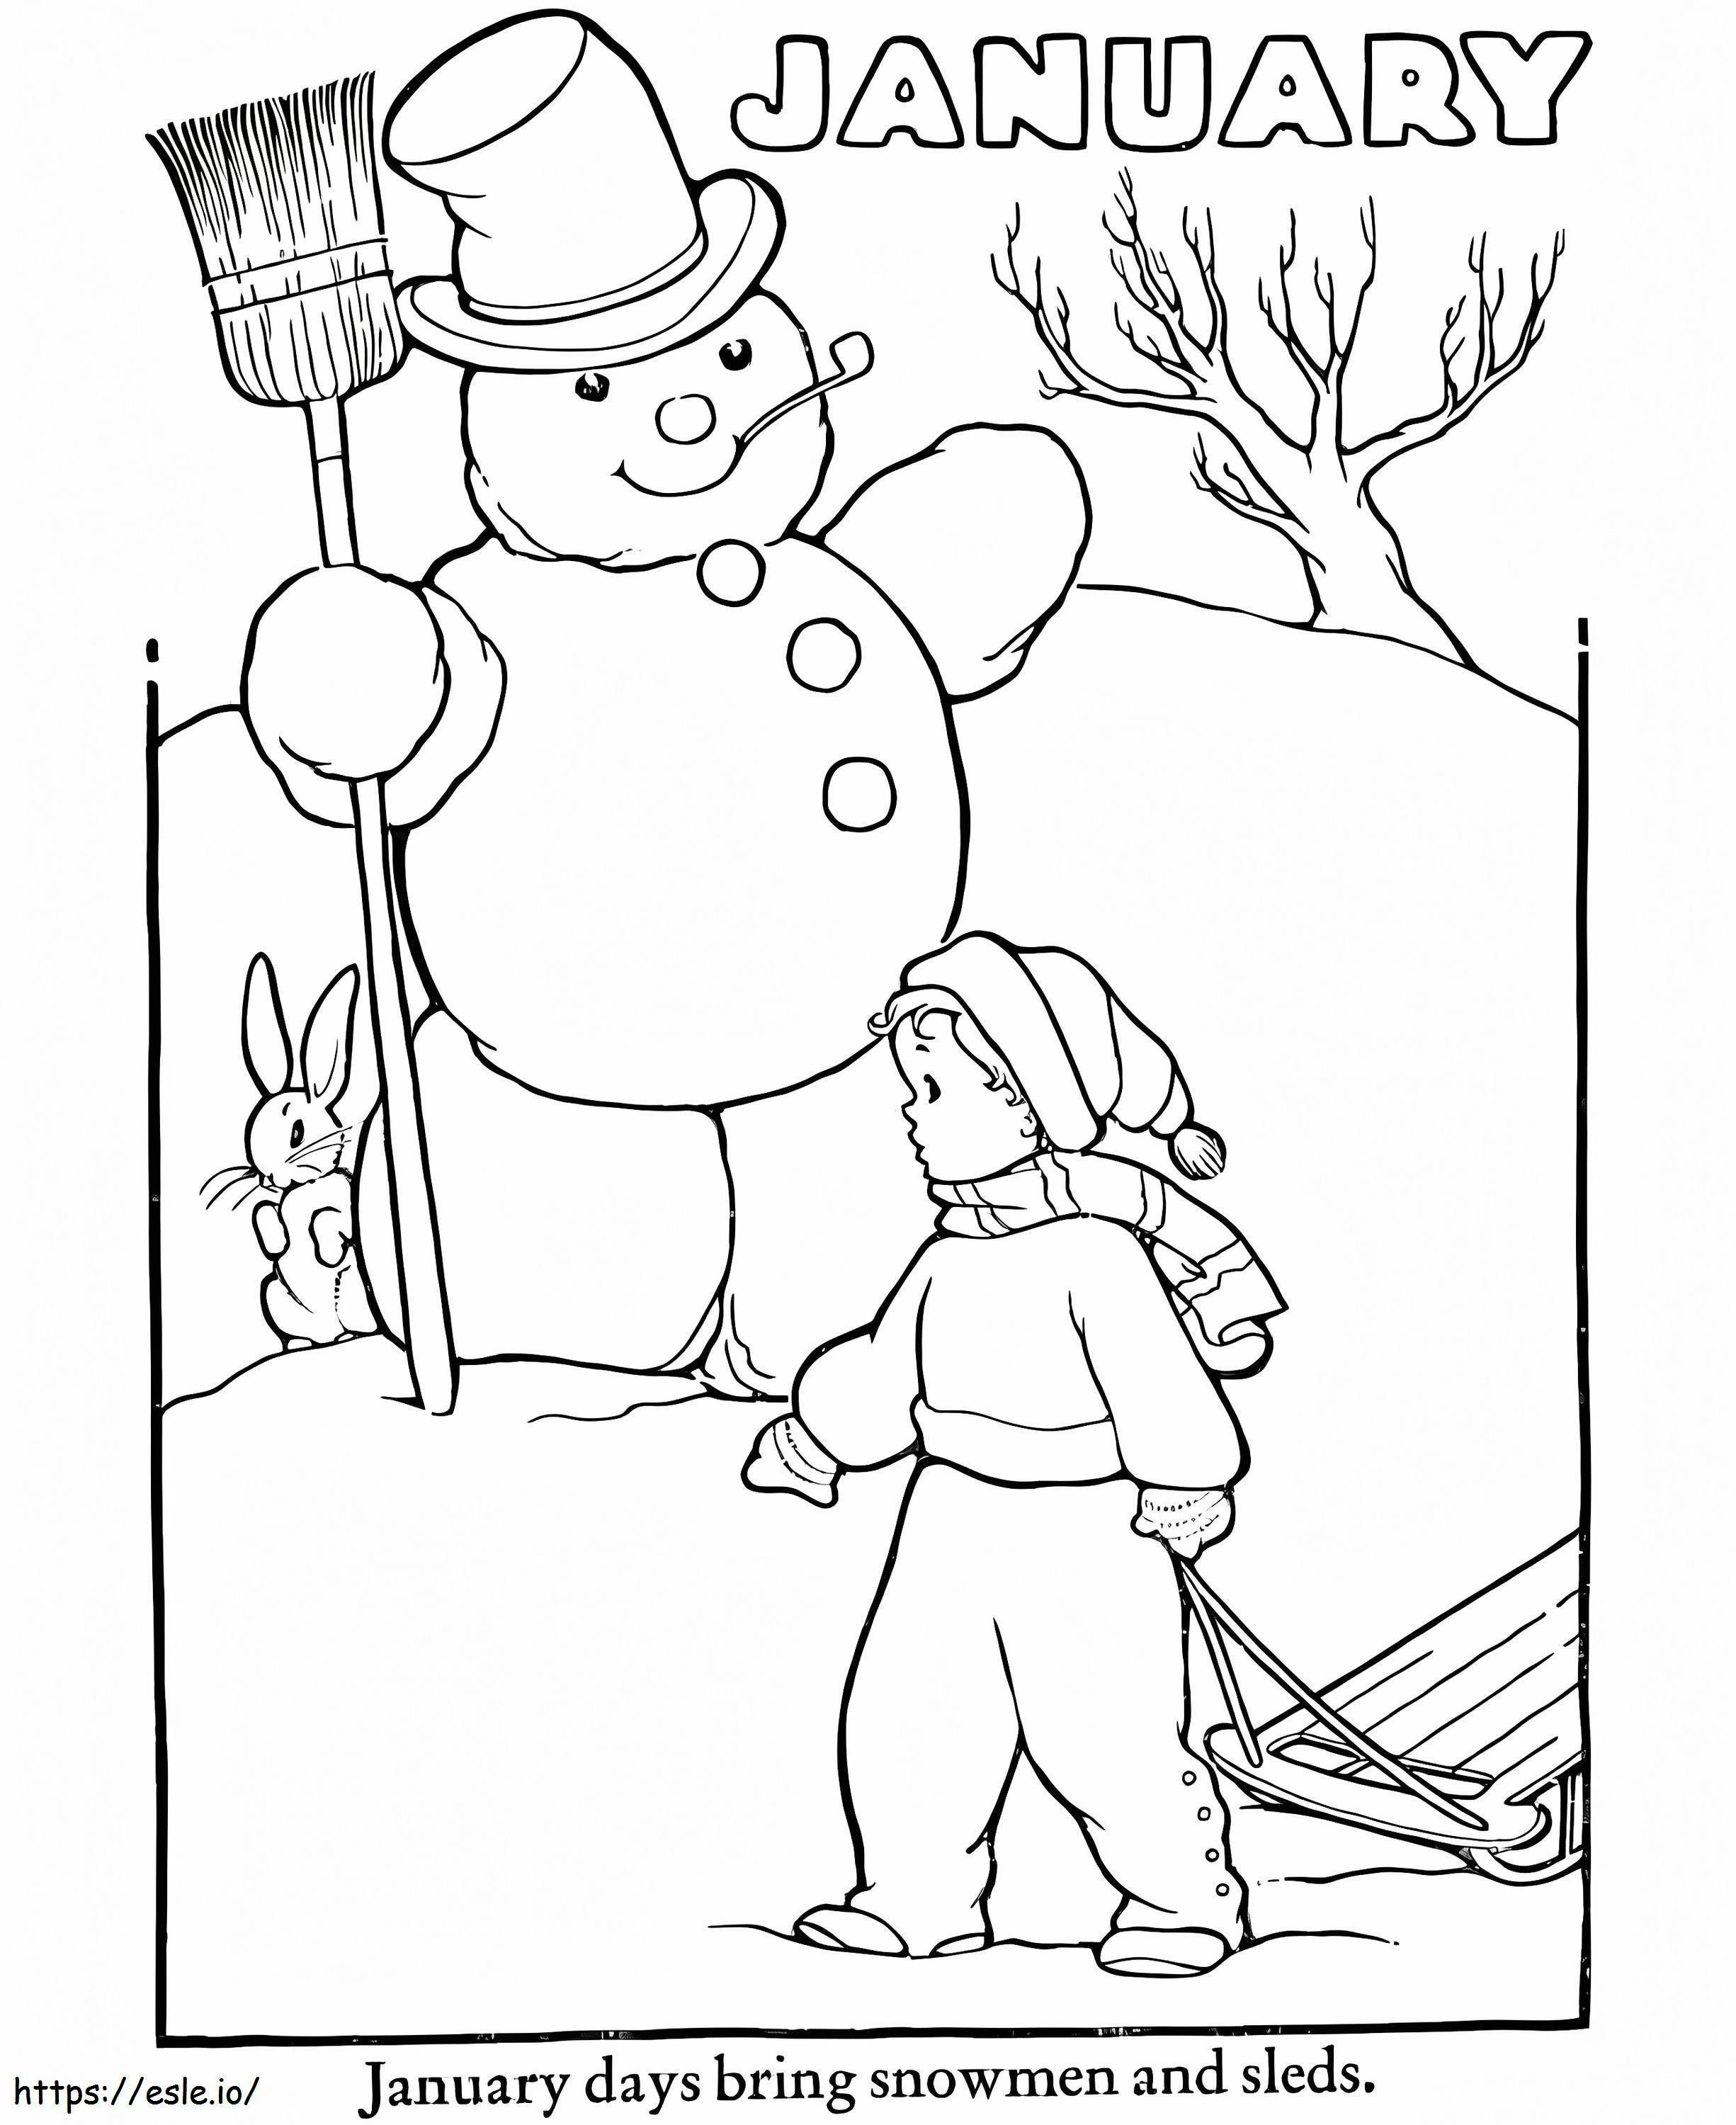 January Snowman coloring page